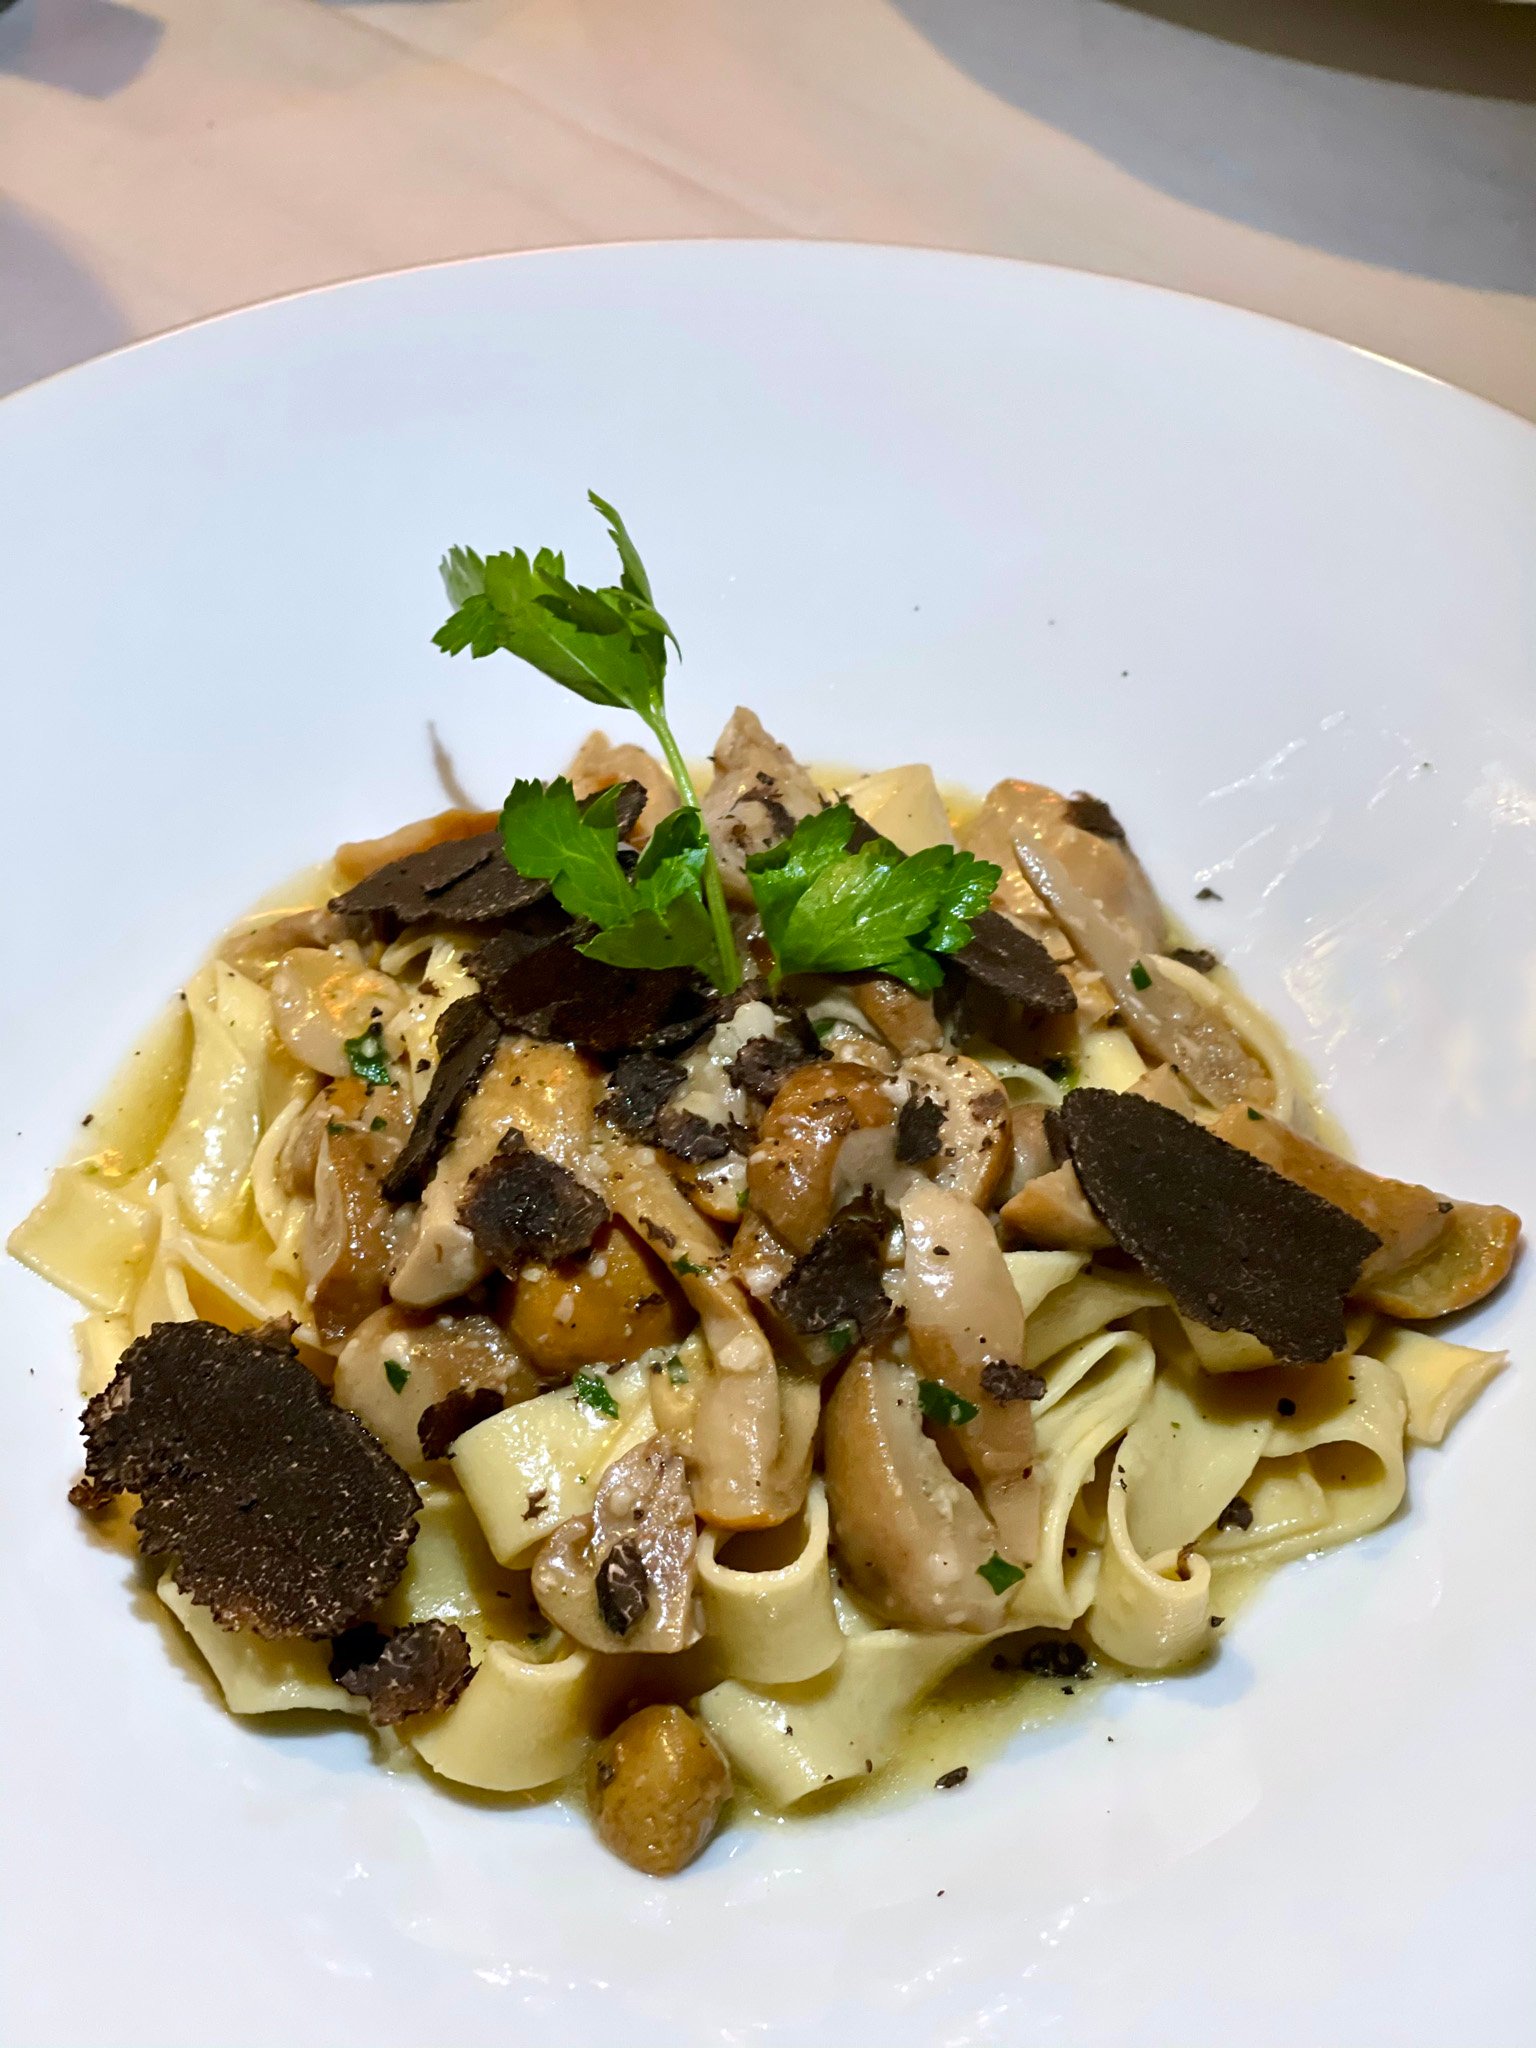 Fettuccine with mushrooms and black truffle